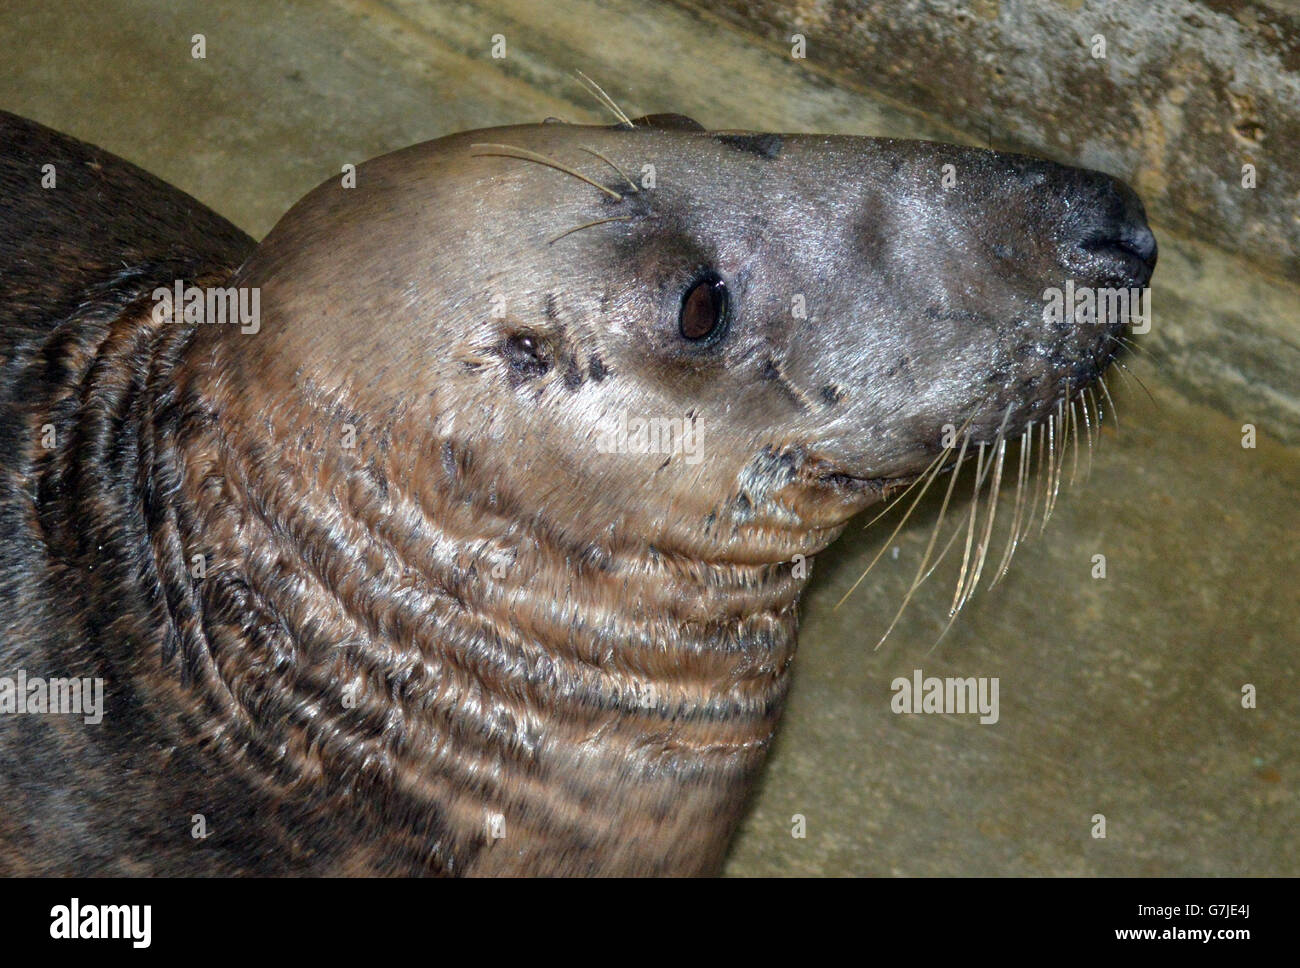 Dumbledore, the seal that was found stranded in a field in Newton-le-Willows, Merseyside, at least 20 miles (32km) from the sea on December 22, has now eaten his first meal since being rescued. Stock Photo